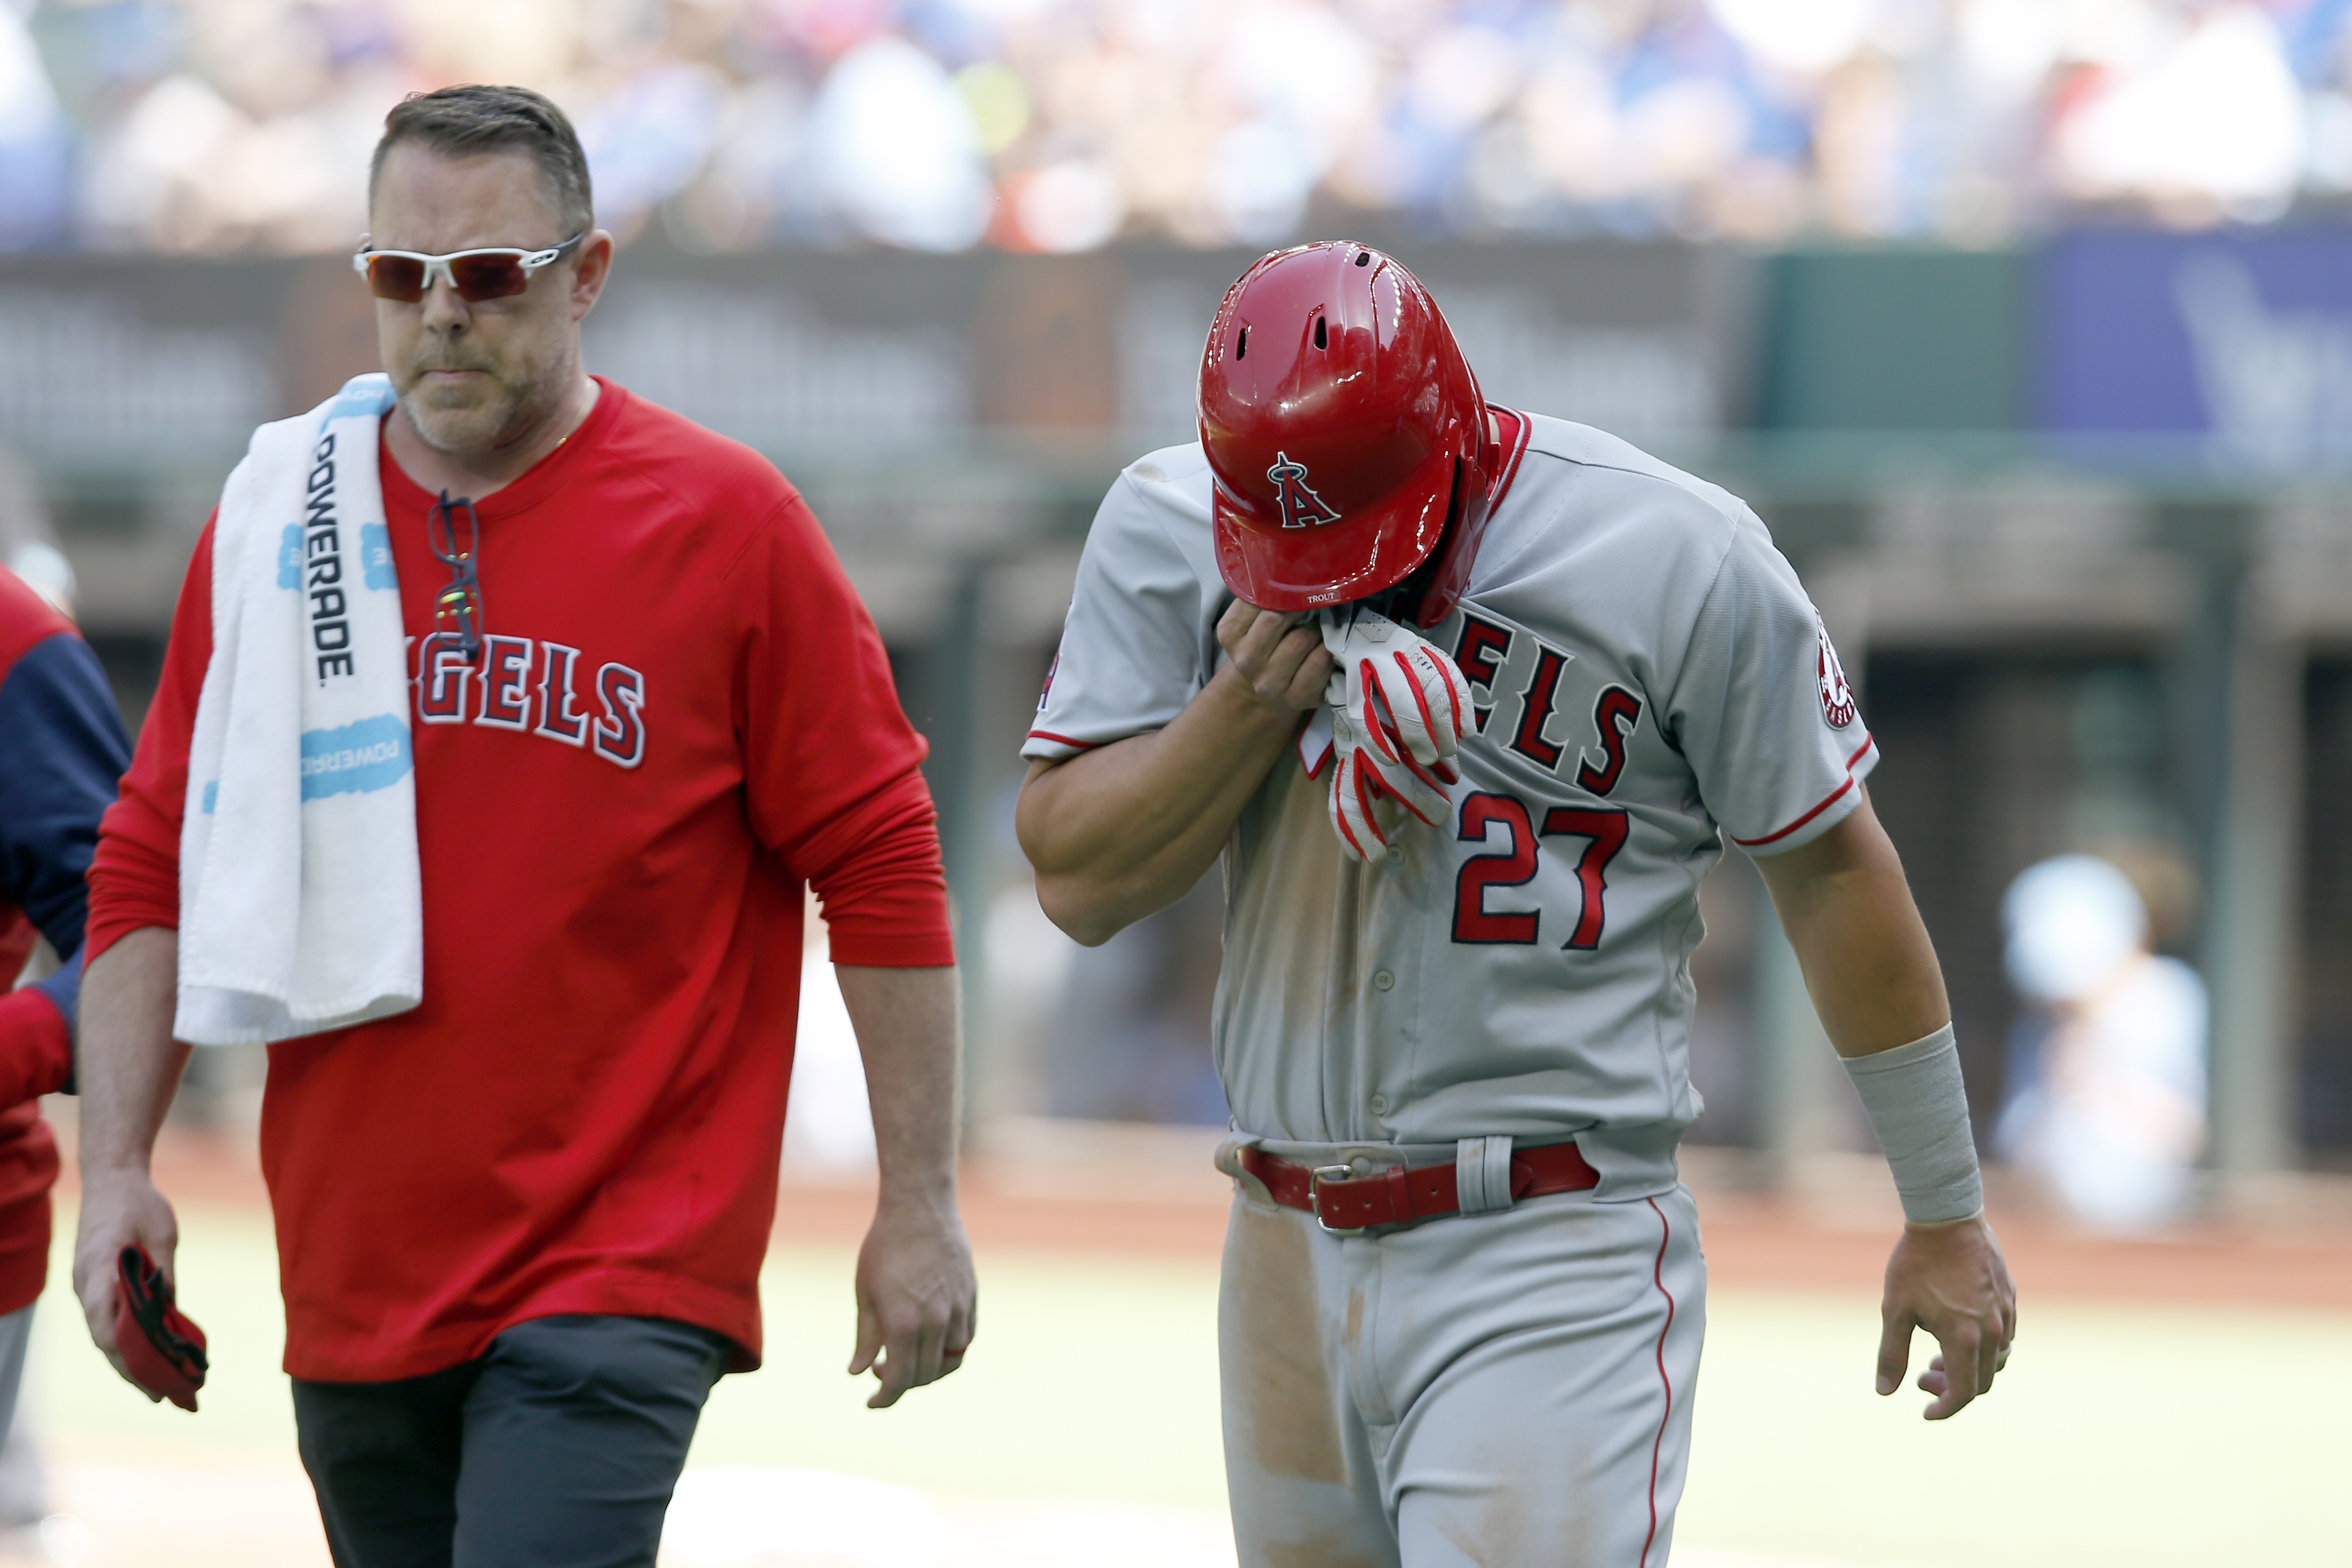 Mike Trout: What's the Right Price for a Trade? - Stadium